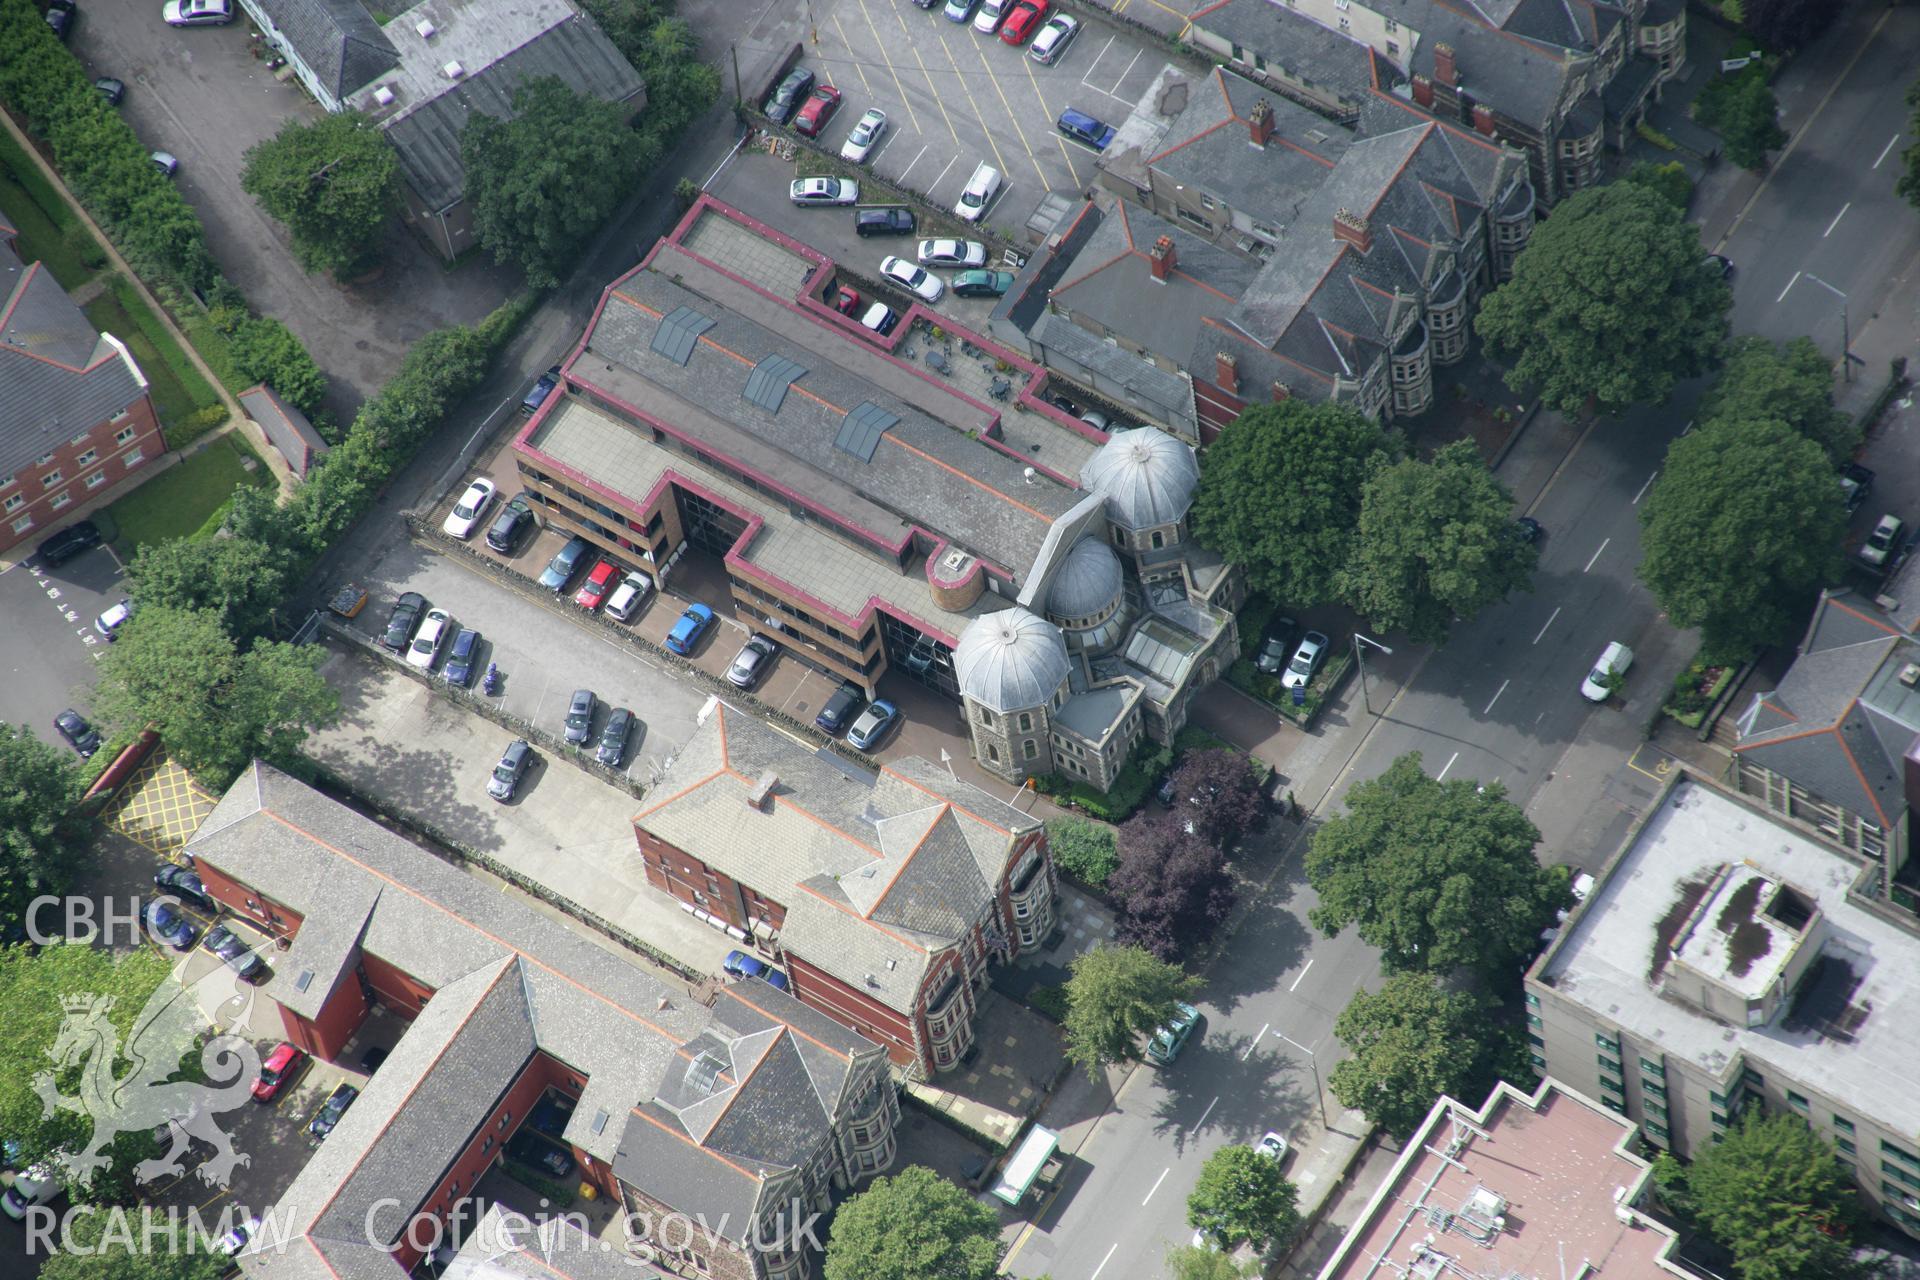 RCAHMW colour oblique aerial photograph of Cardiff United Synagogue, Cathedral Road, Cardiff. Taken on 30 July 2007 by Toby Driver